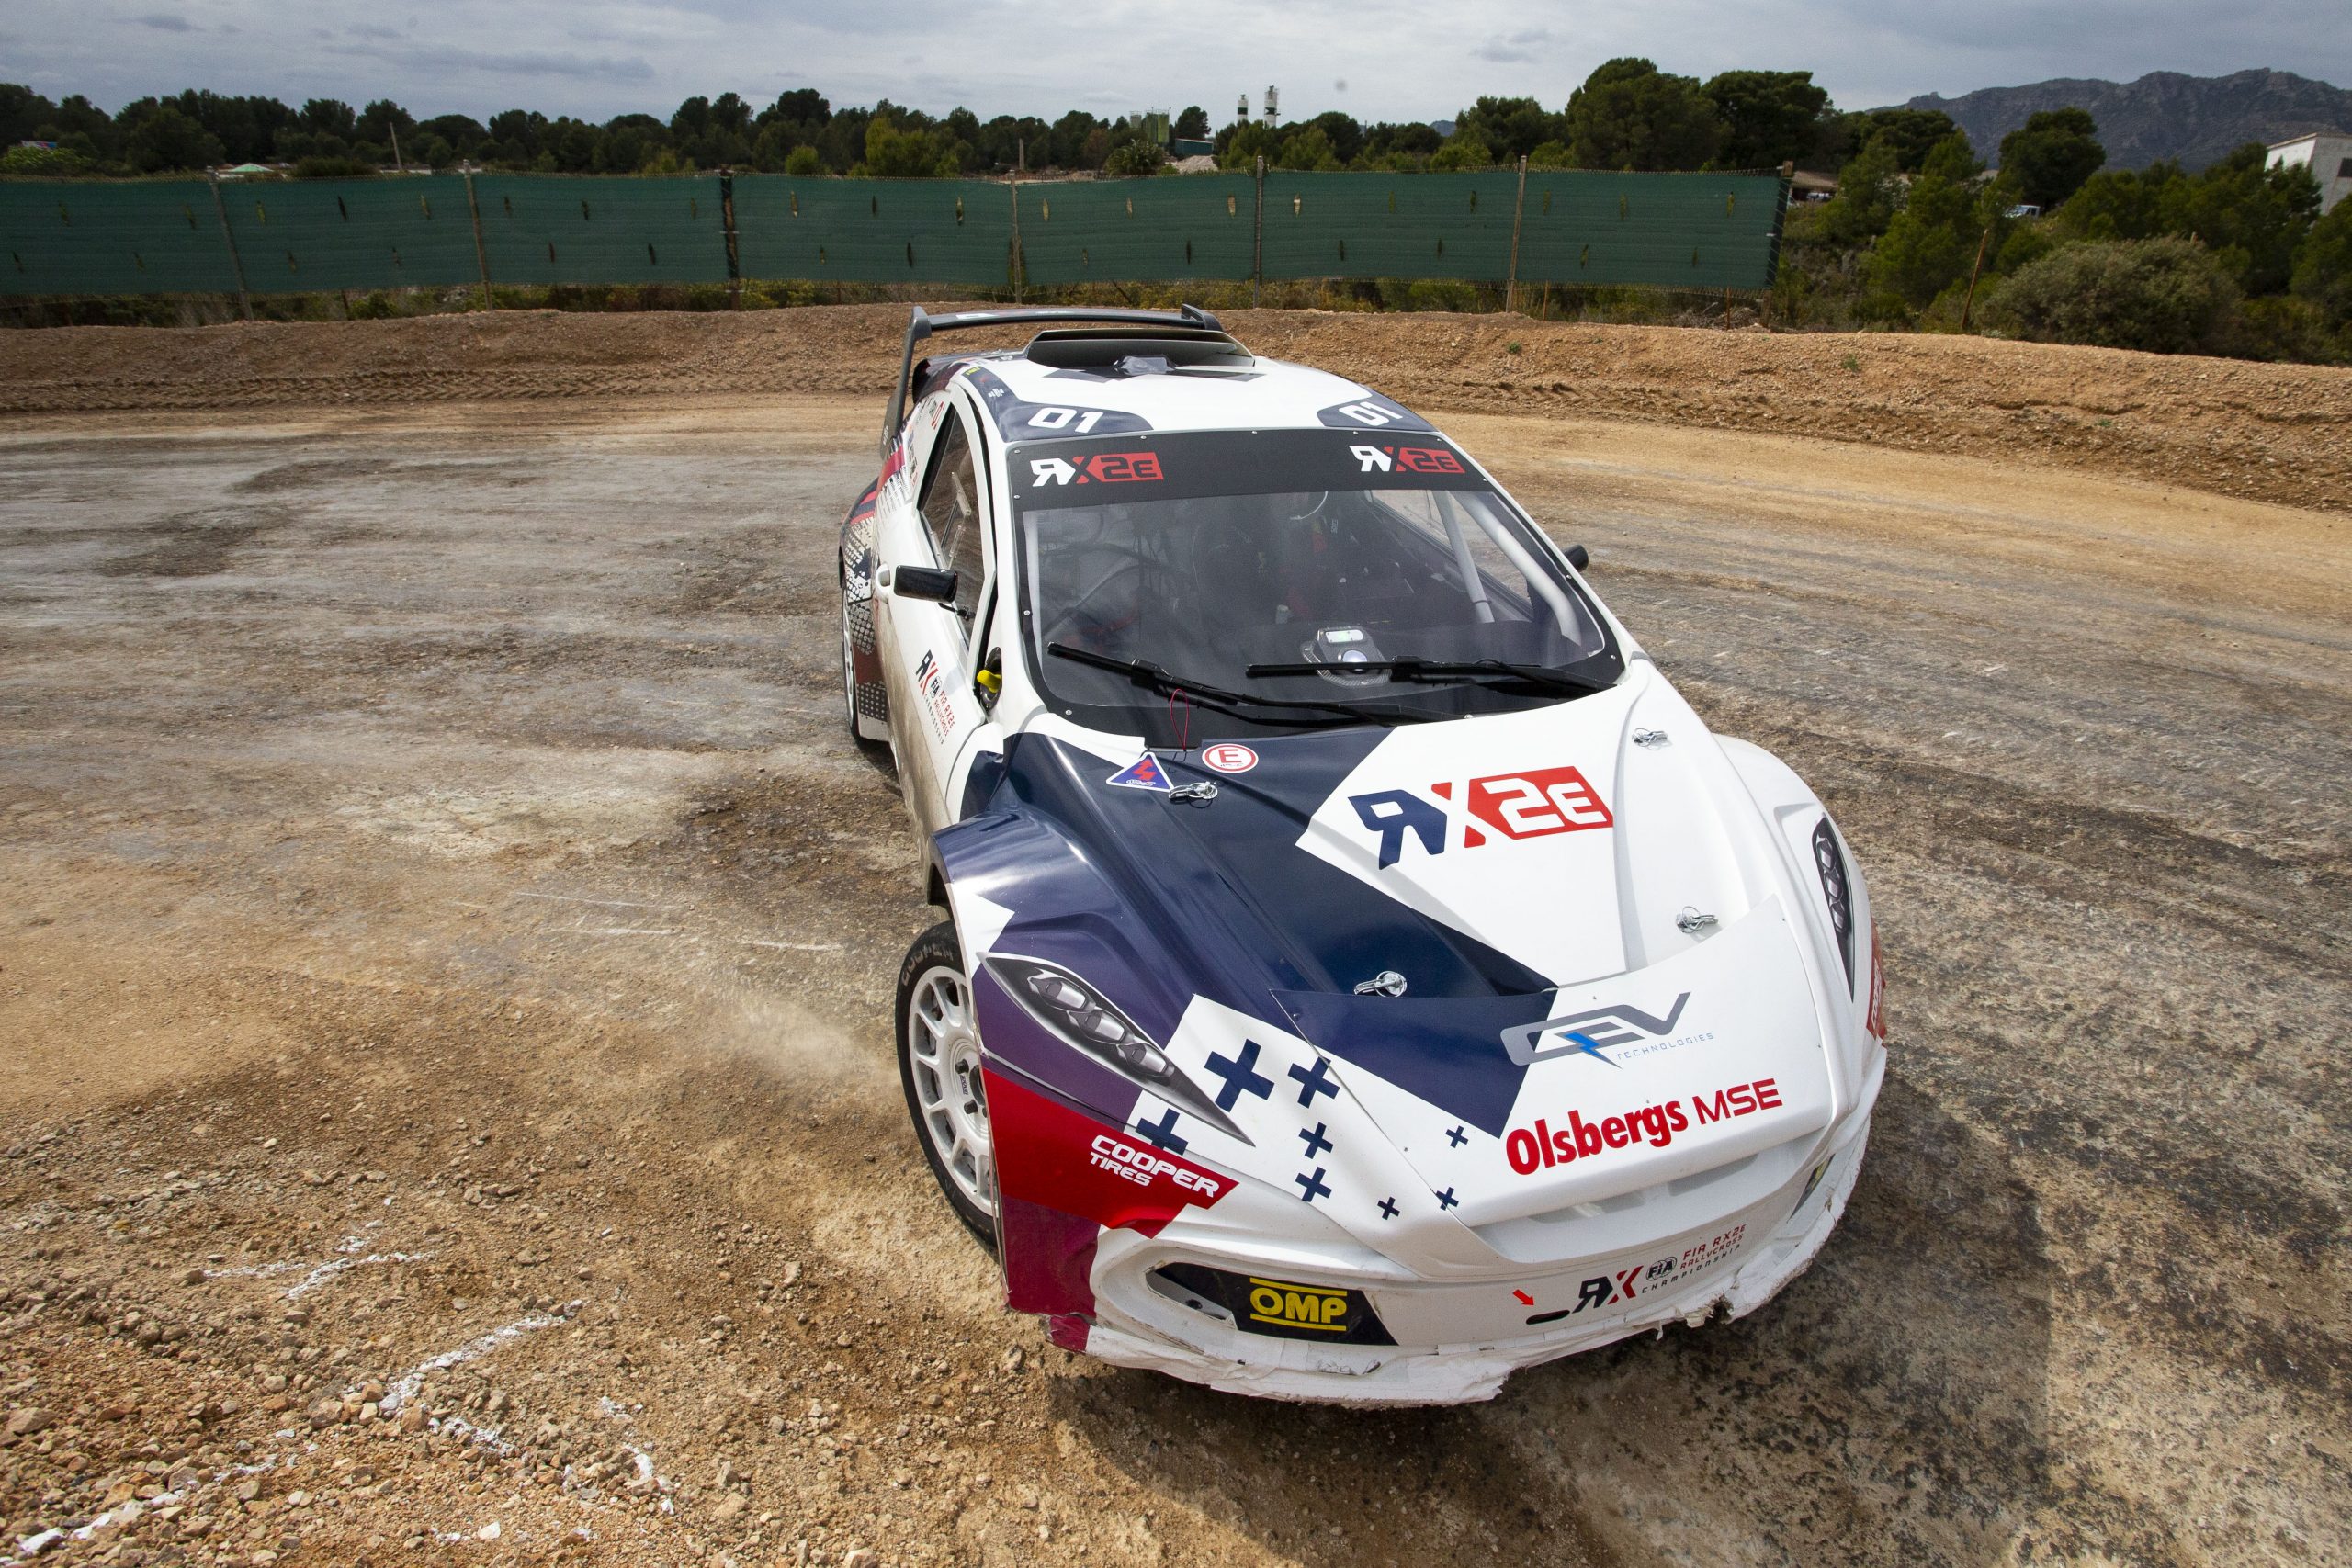 FIA RX2e Championship car receives seal of approval from motorsport big-hitters, QEV